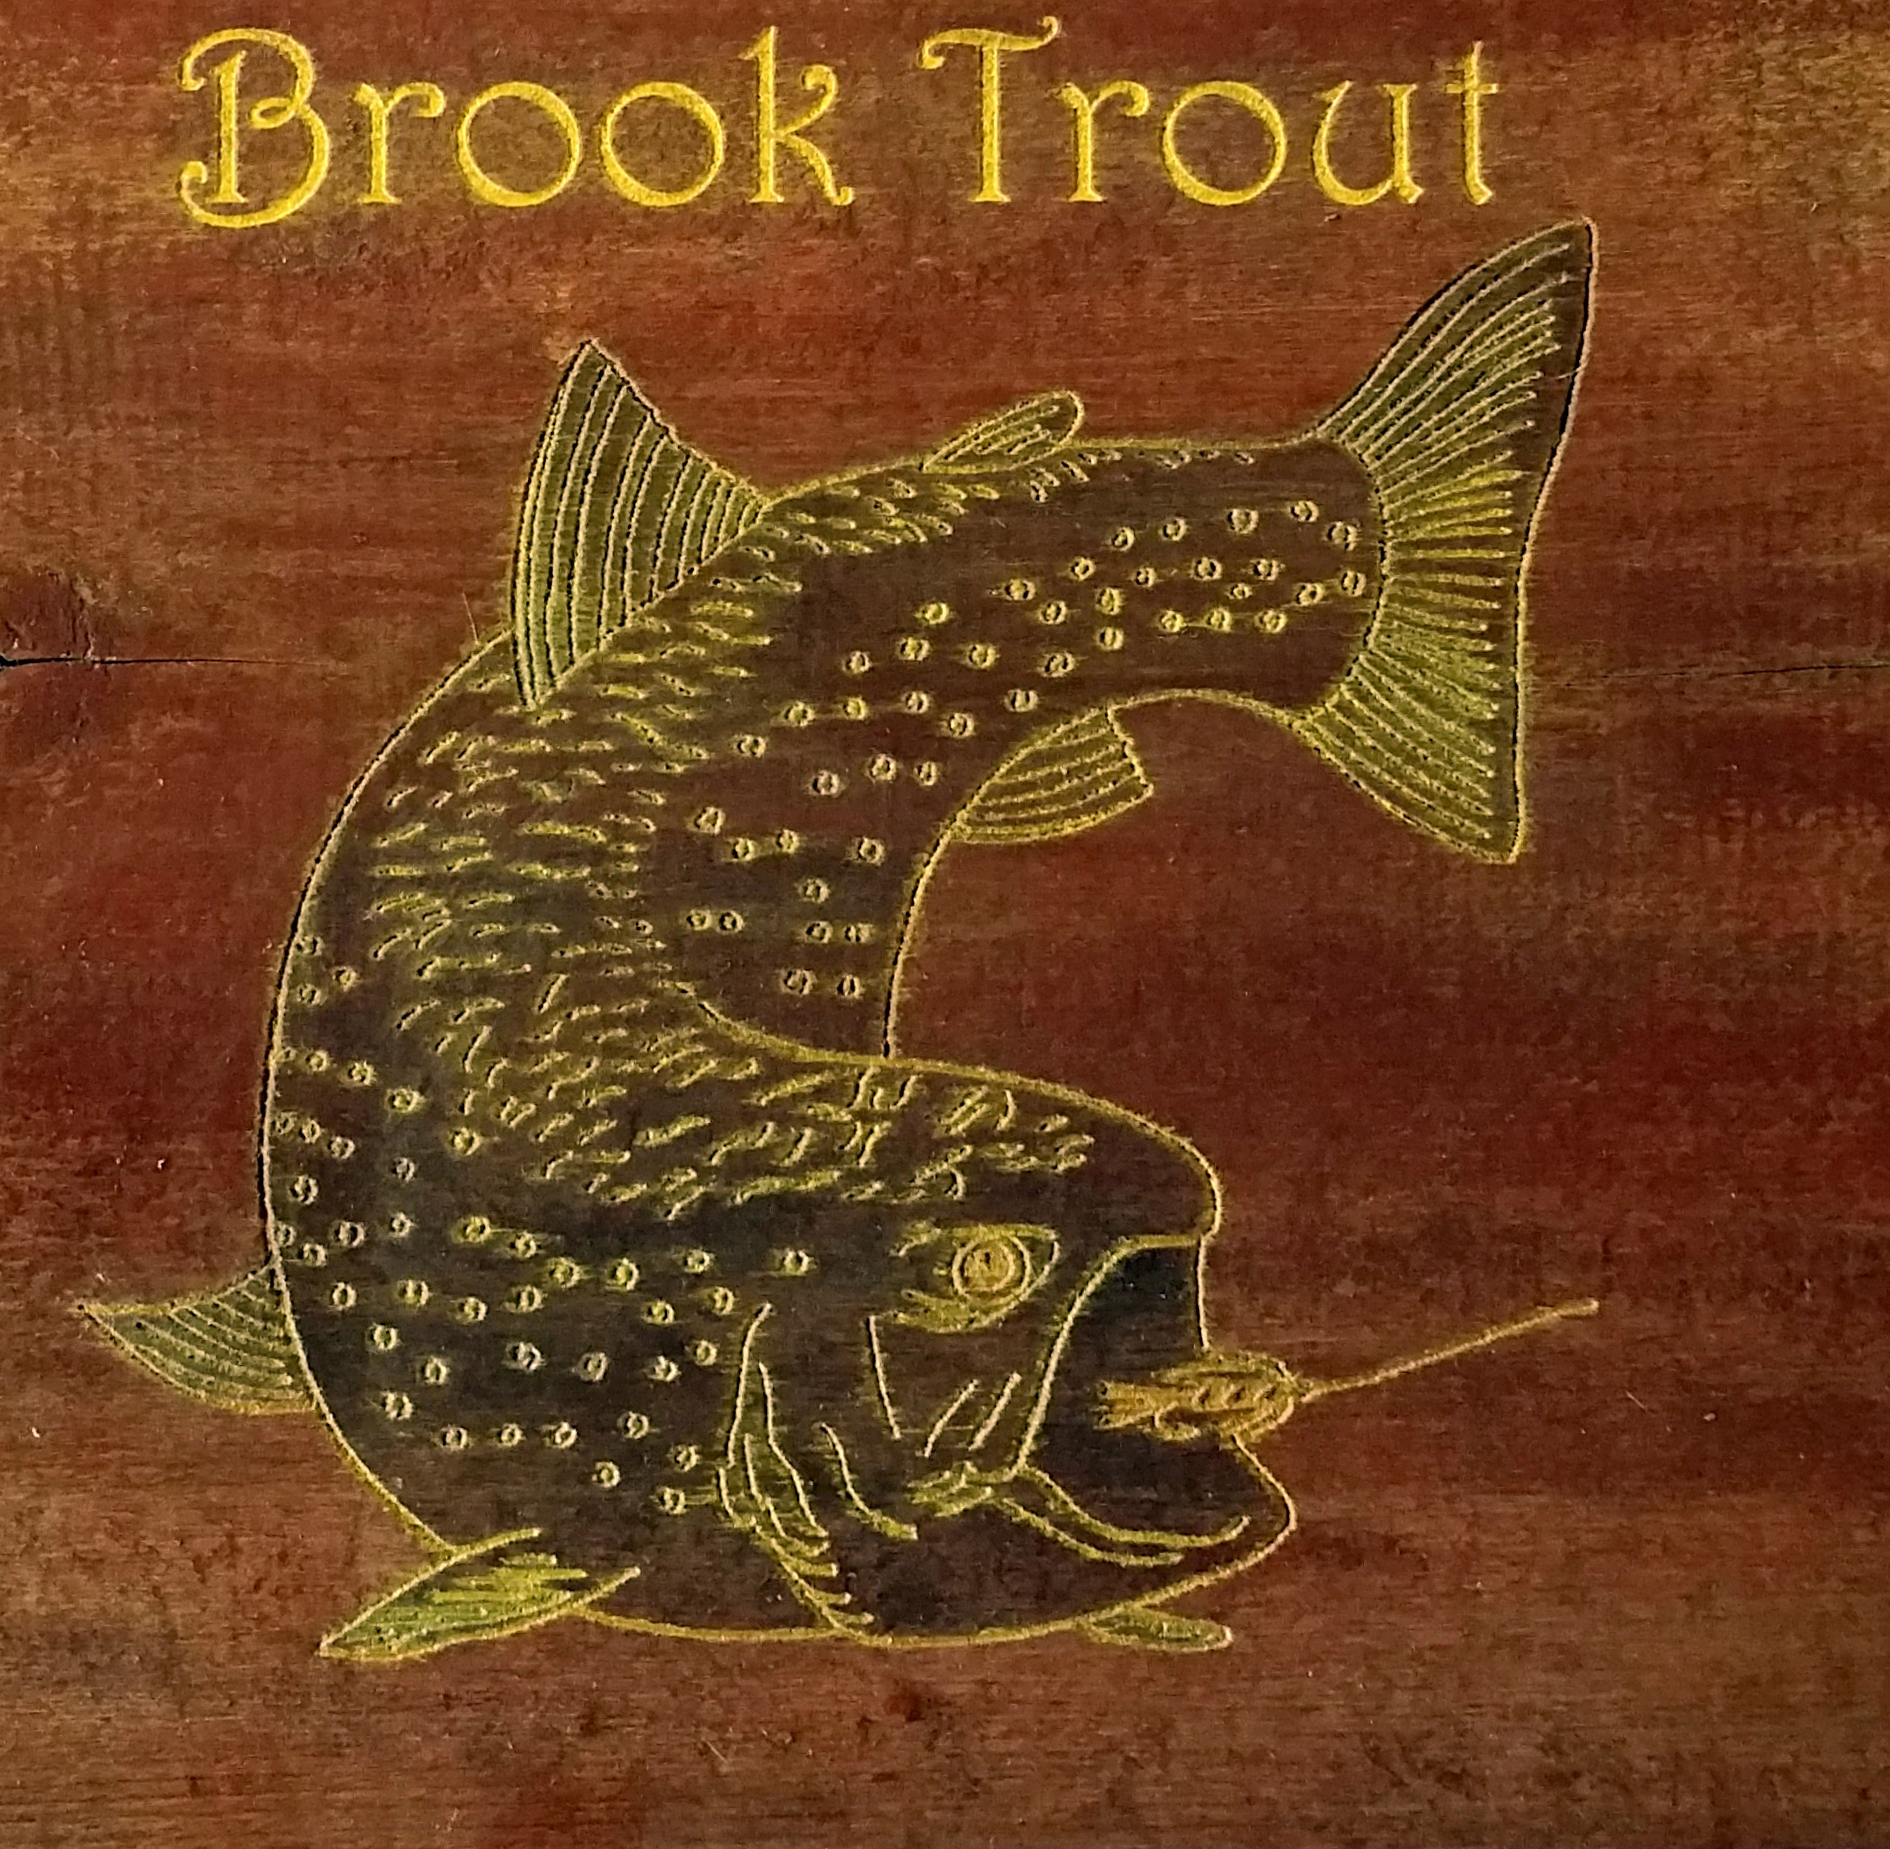 brookie on a 150 year old wood sap bucket cover